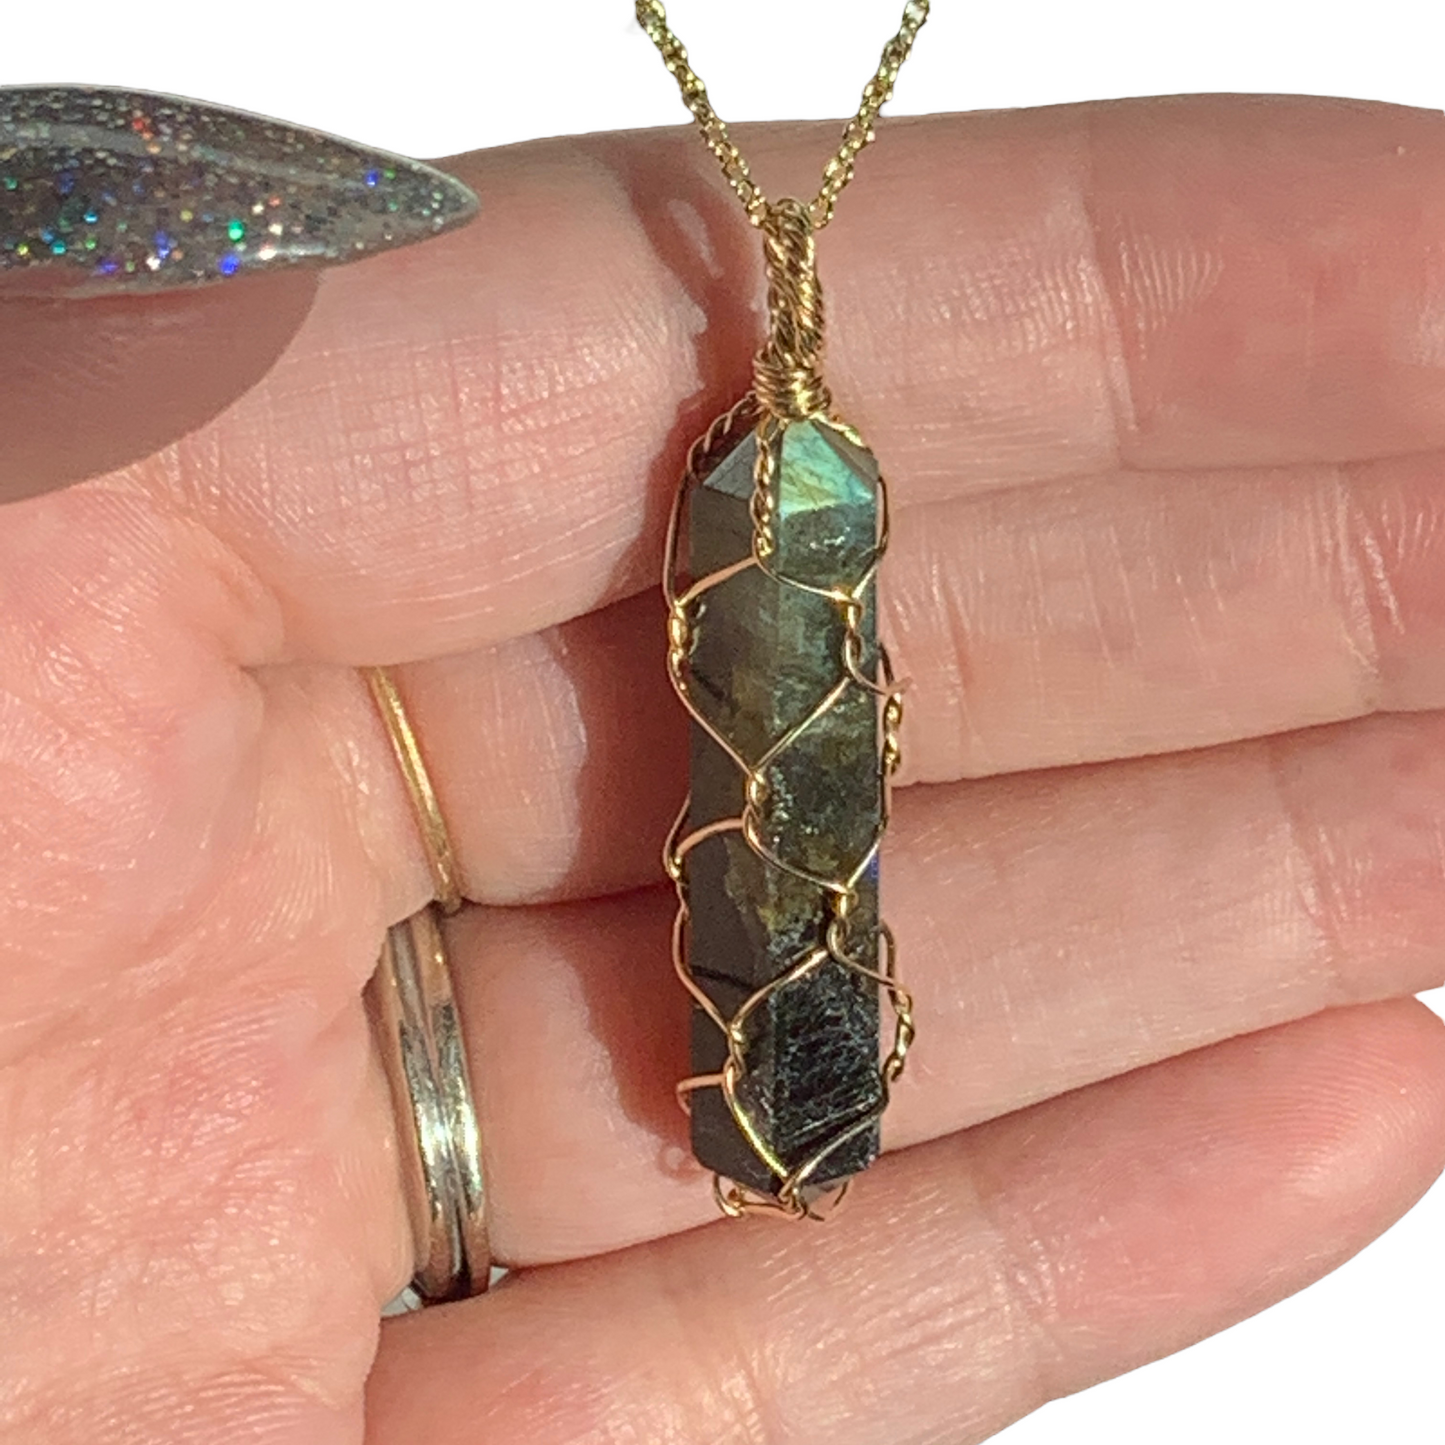 Sterling Silver | 14 KT Gold Filled Labradorite Wire Wrapped Caged Pendant